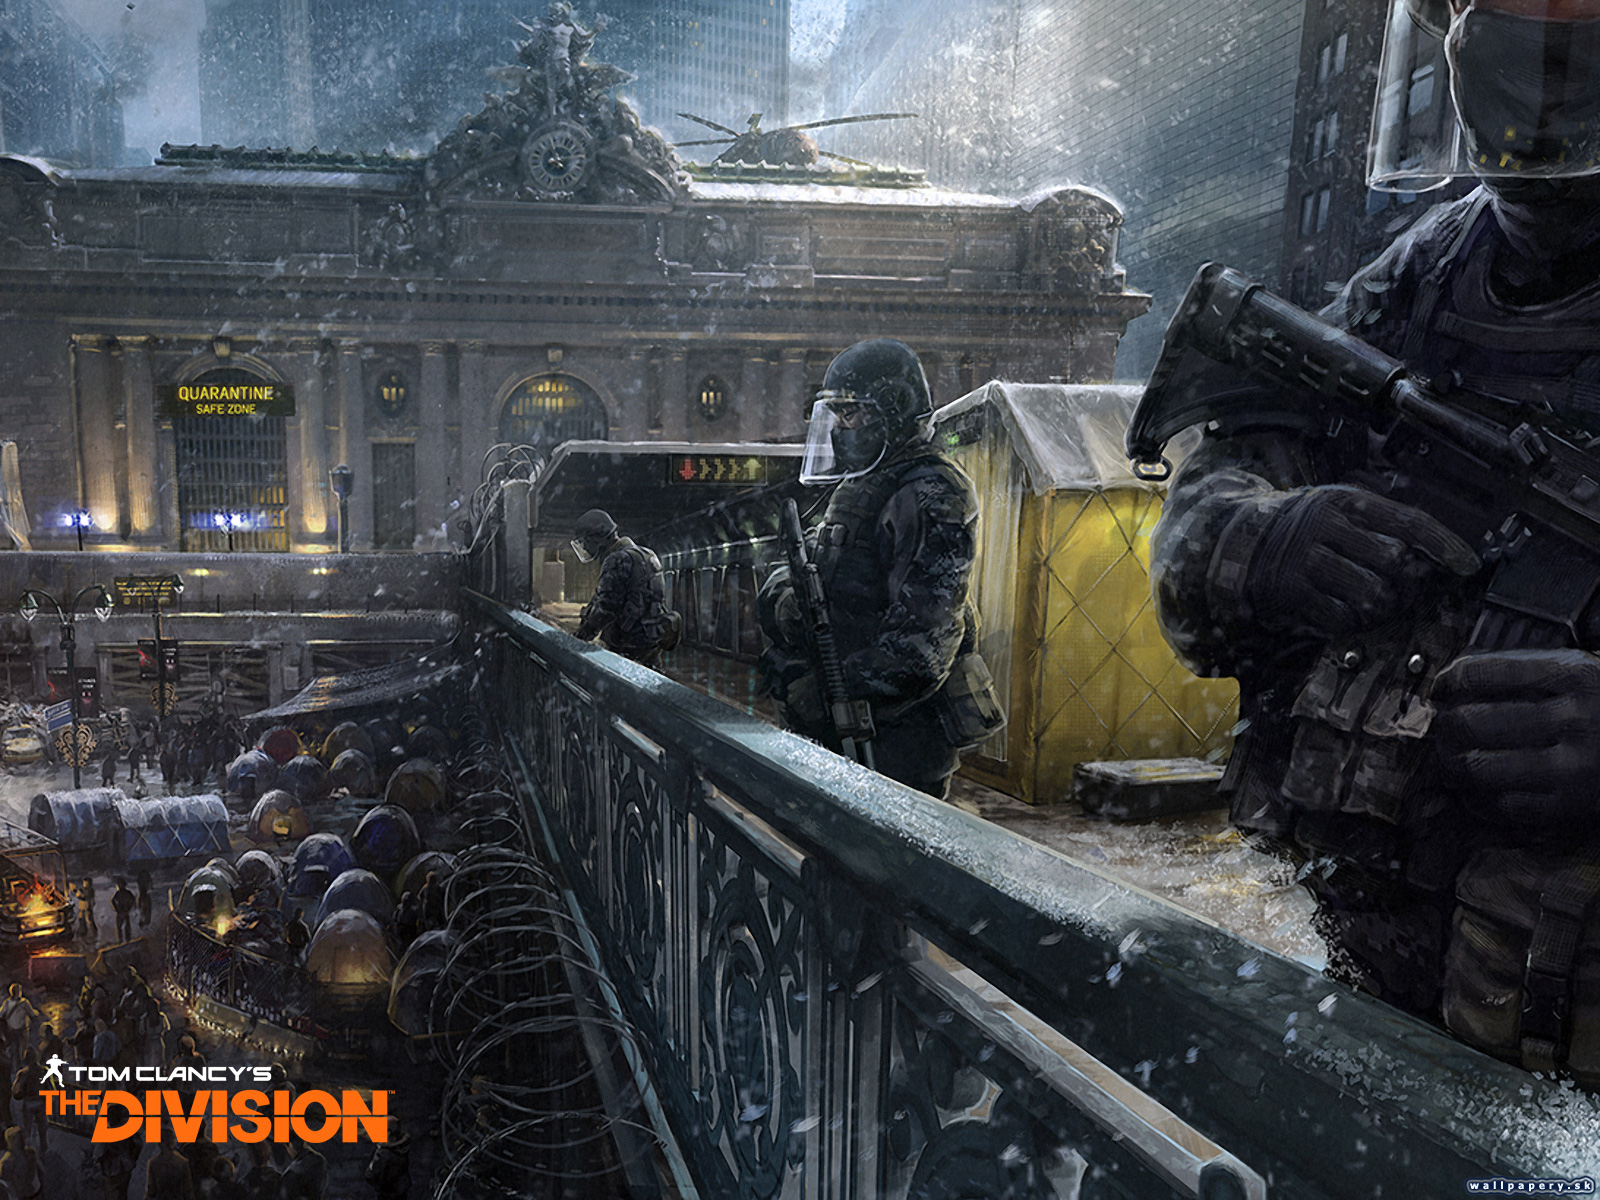 The Division - wallpaper 2